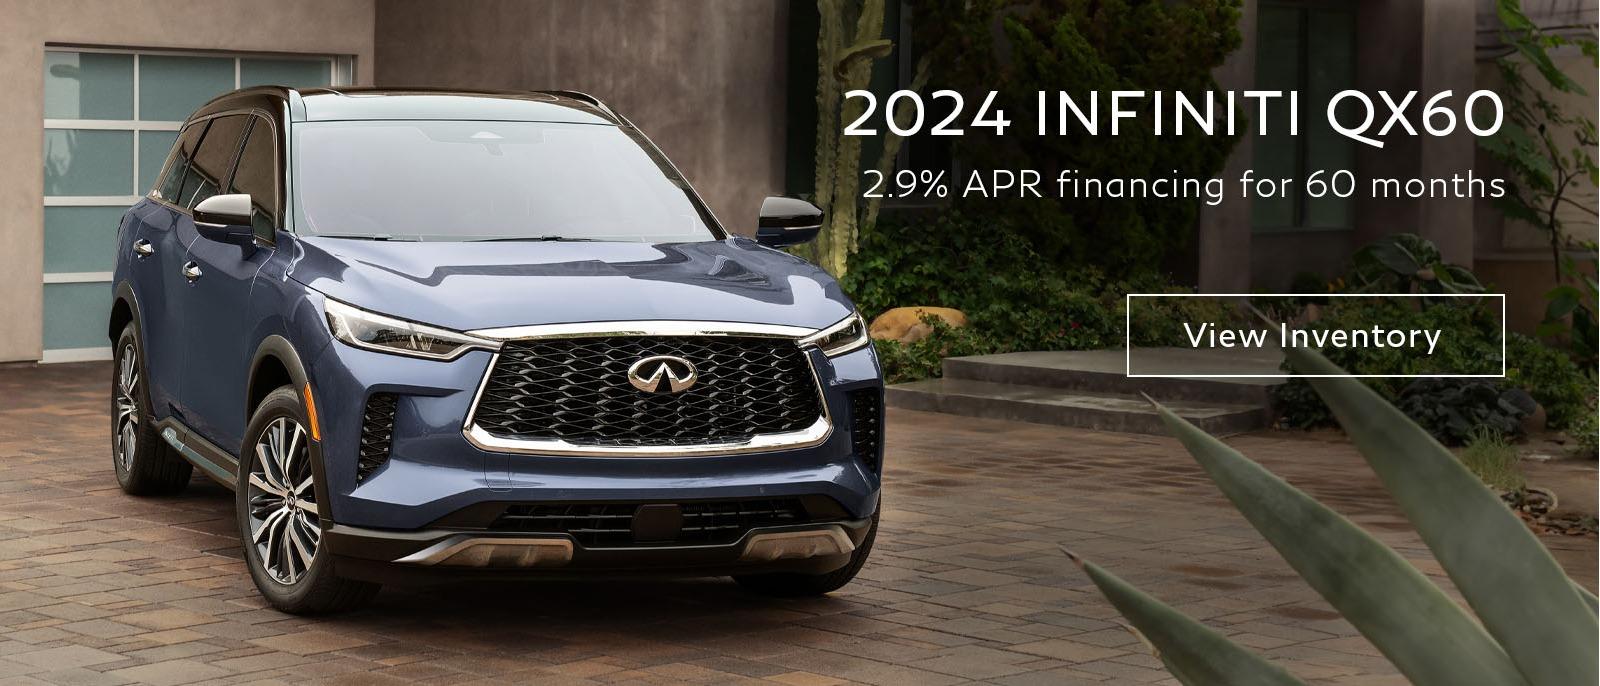 2.9% APR Financing for 60 Months on 2024 INFINTI QX60